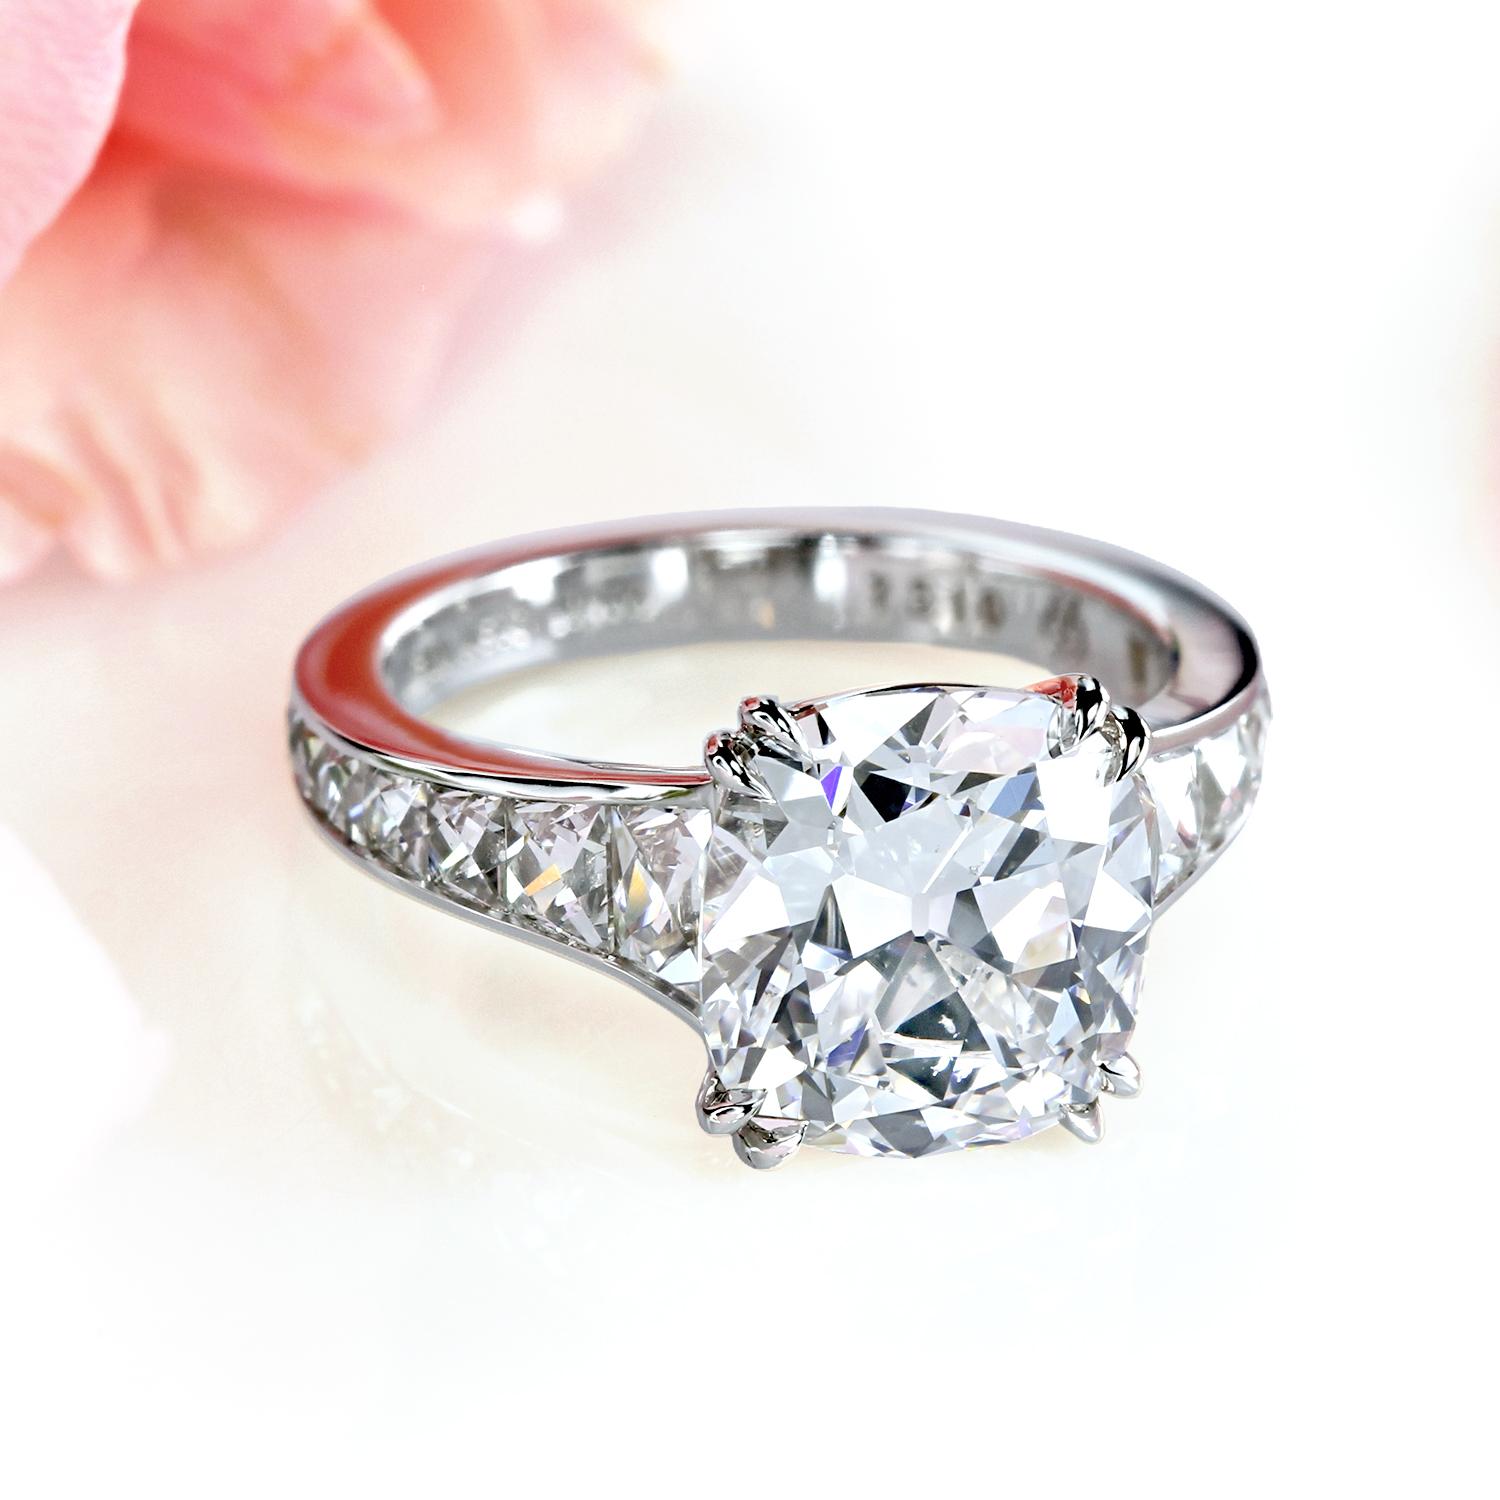 Mon Cheri™ exclusive solitaire featuring a GIA 3.09-carat True Antique™ cushion diamond and channel-set French cut diamonds.

14 calibrated True Antique™ French cut diamonds
Hand-forged platinum
Double claw prongs

The lead time for project